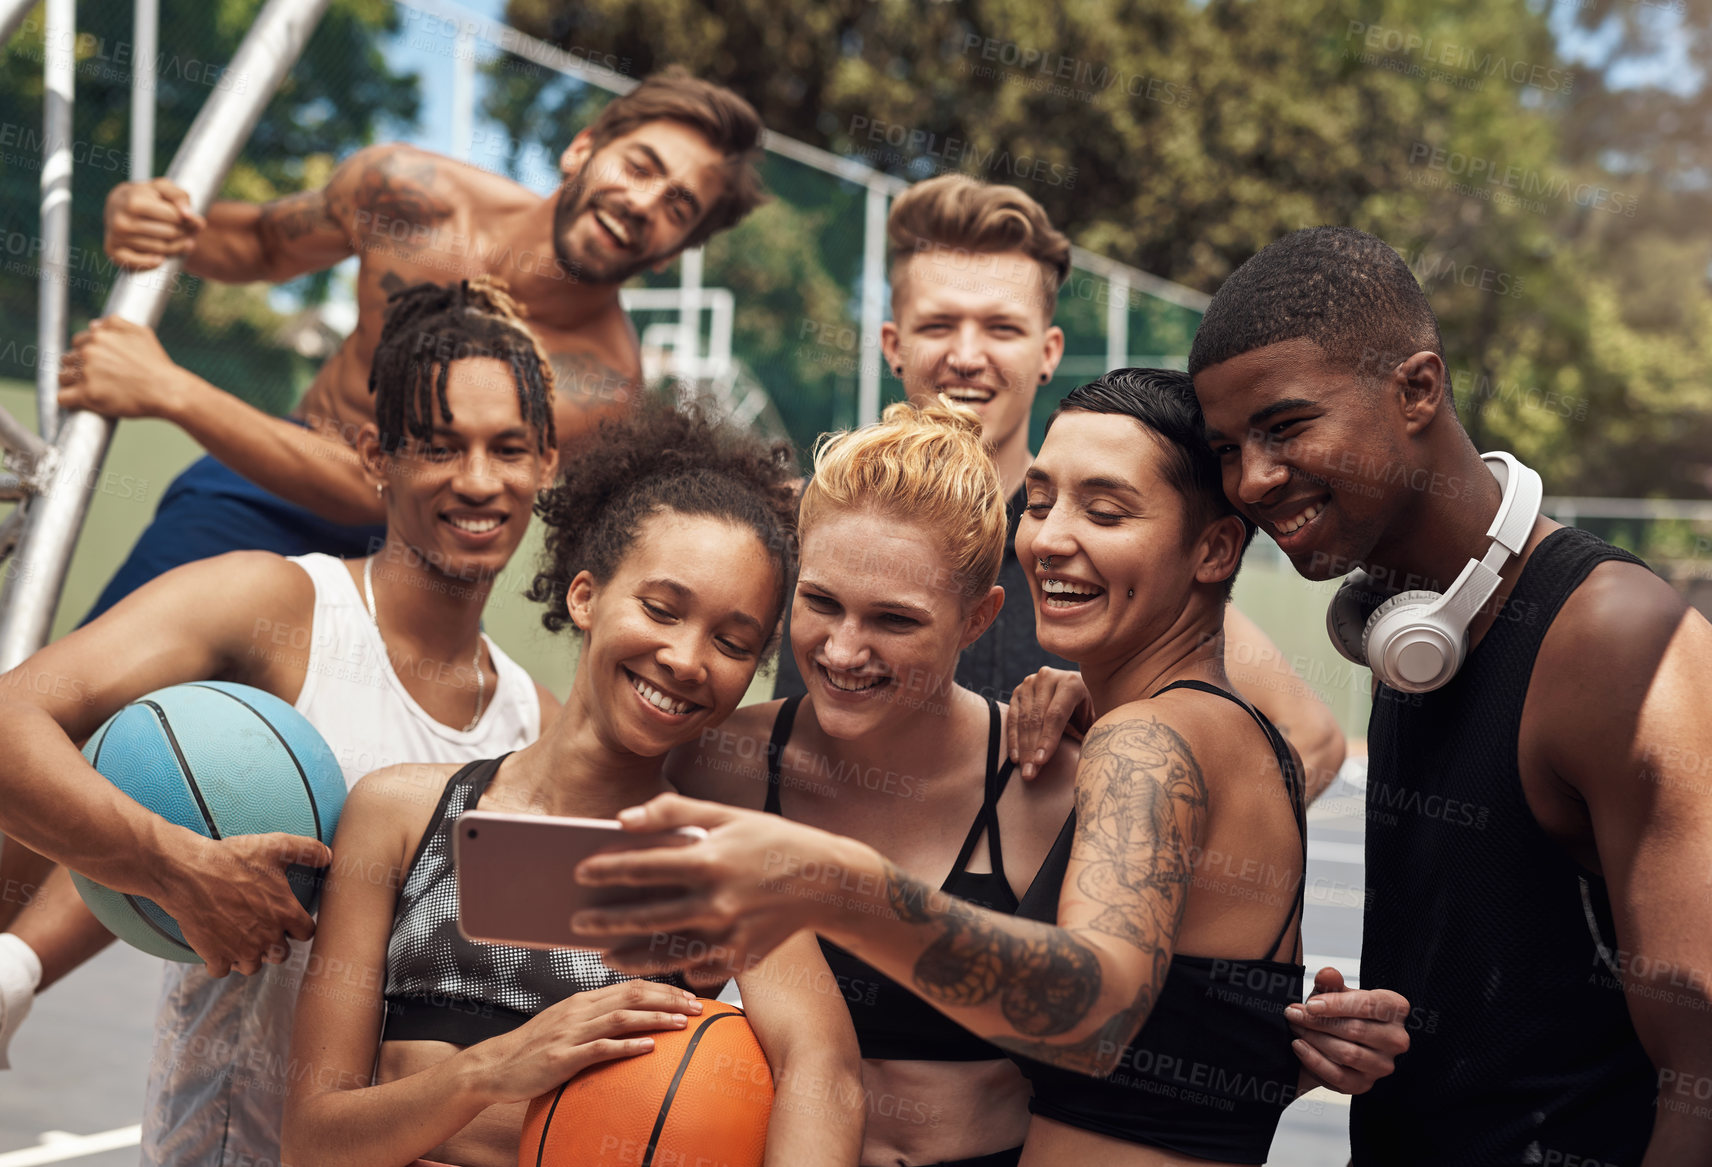 Buy stock photo Shot of a group of sporty young people taking selfies together on a sports court